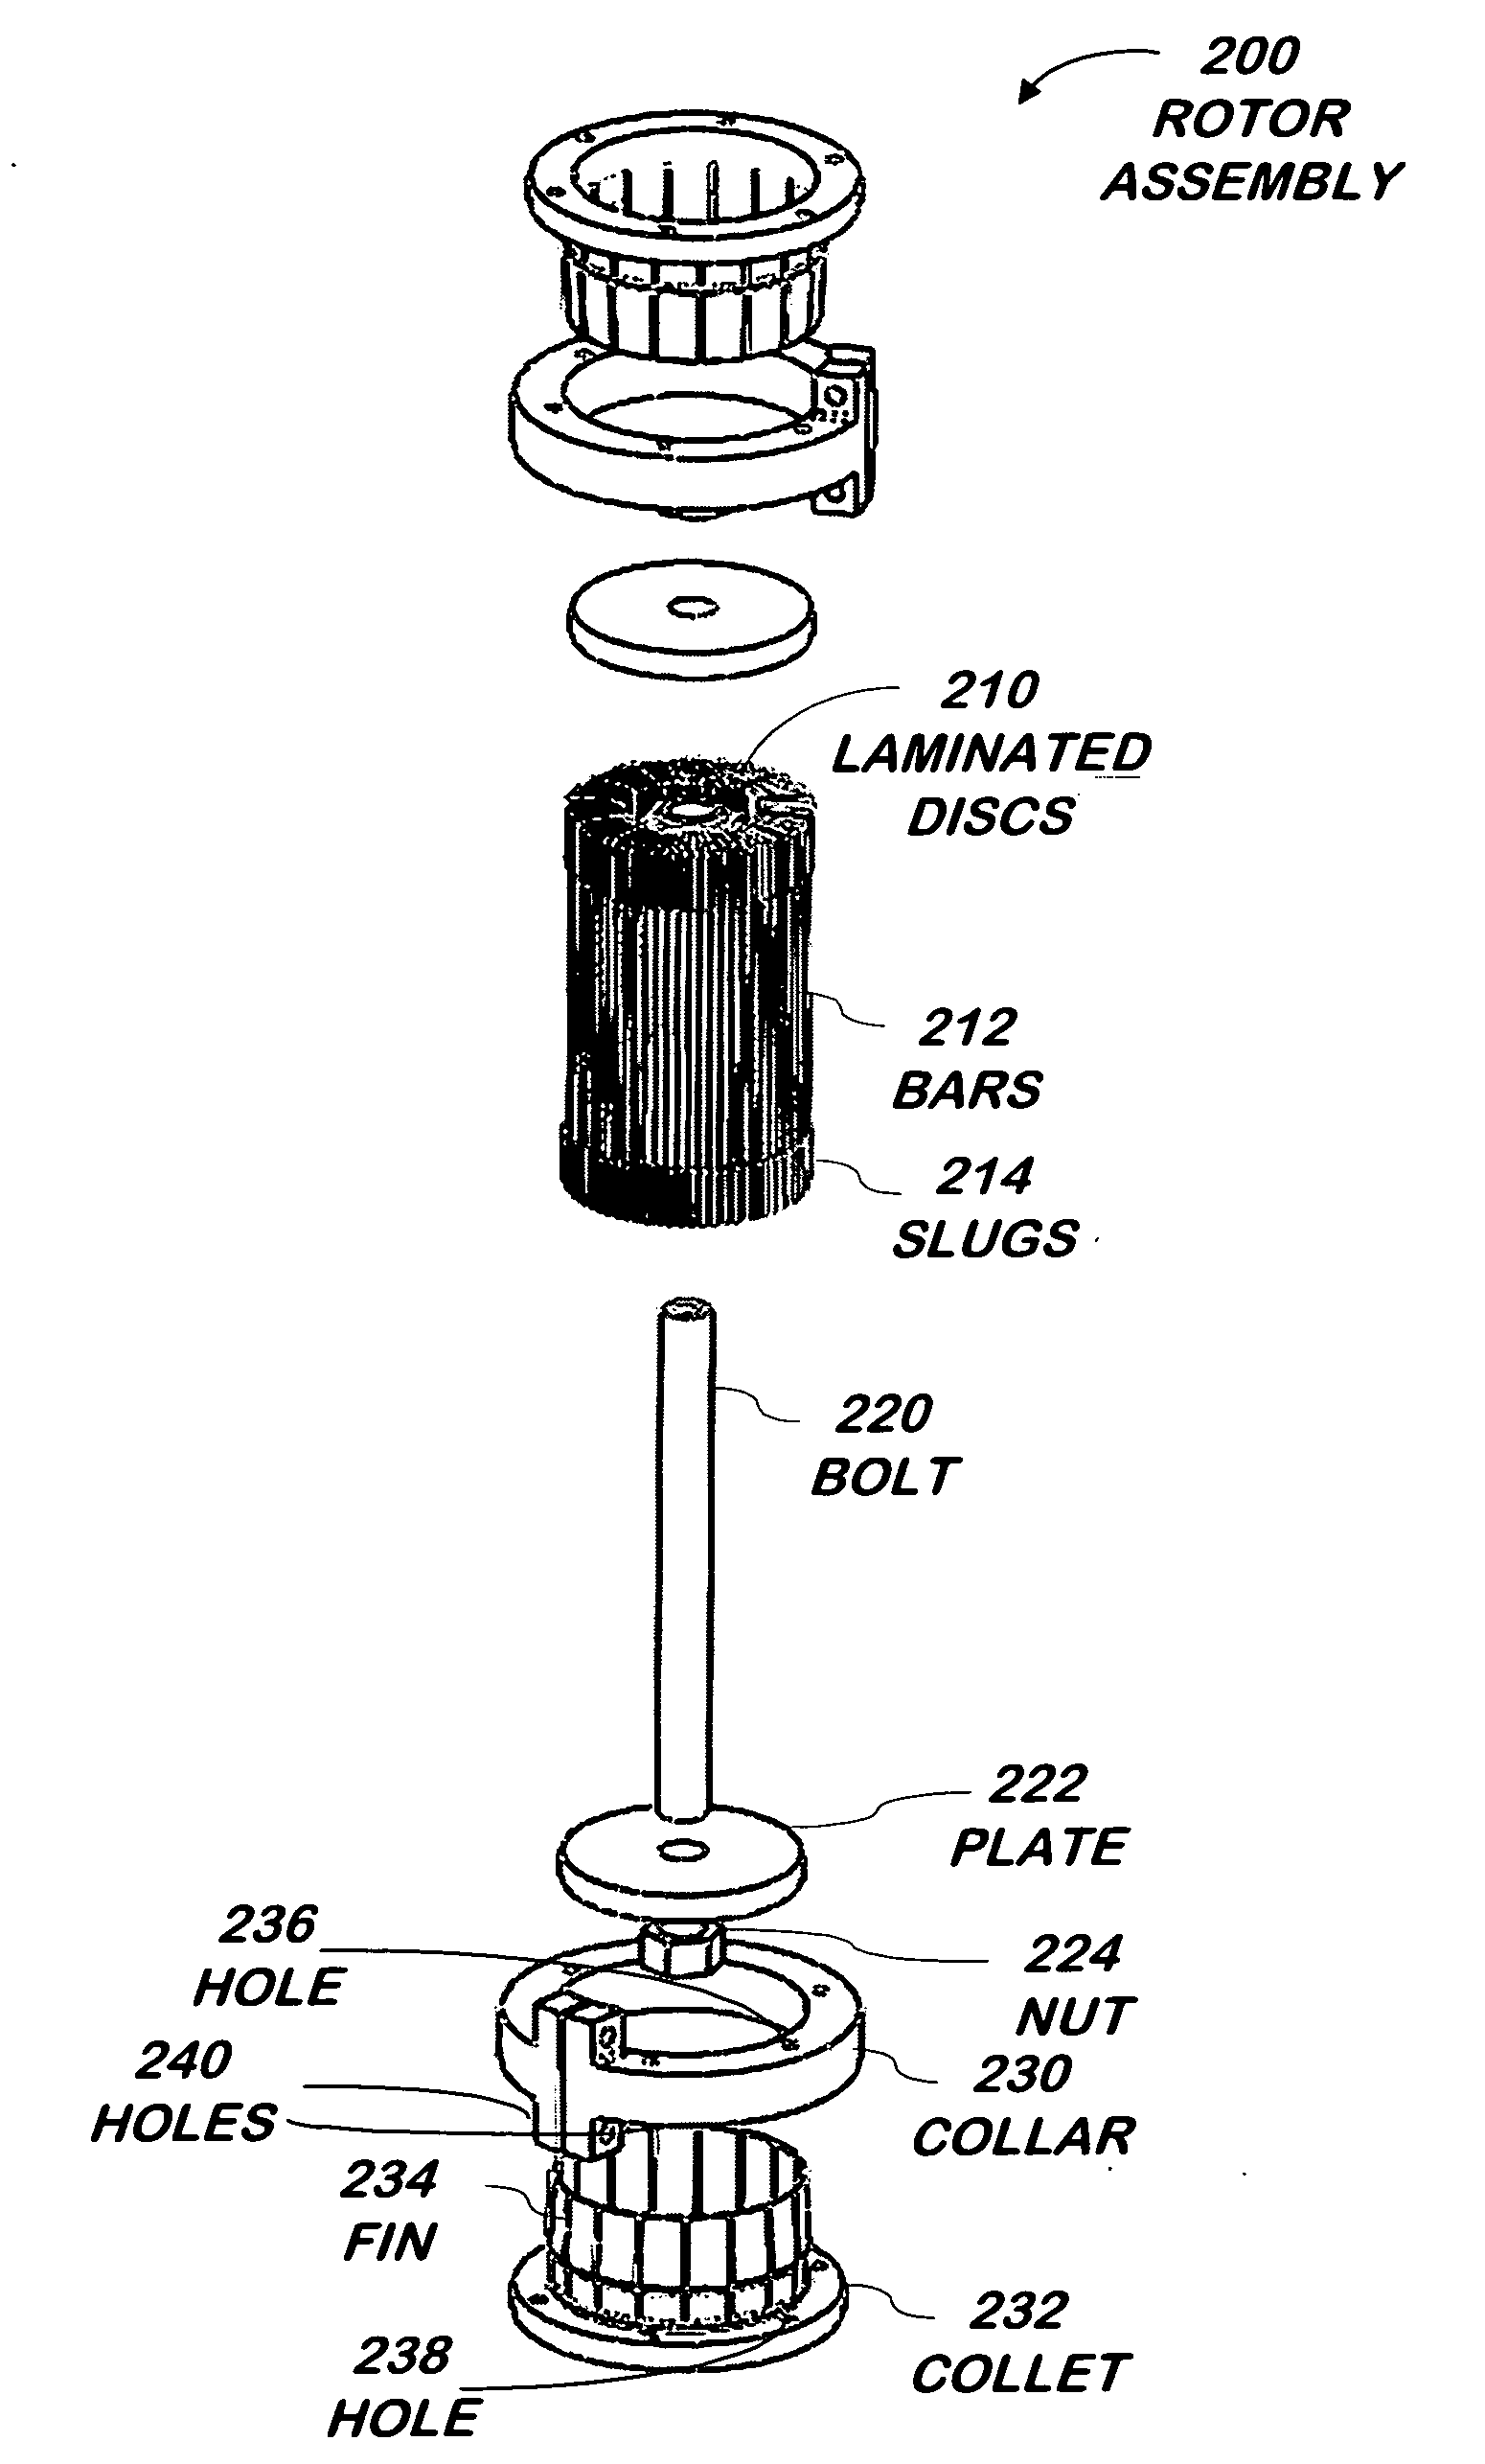 System and method for an efficient rotor for an electric motor